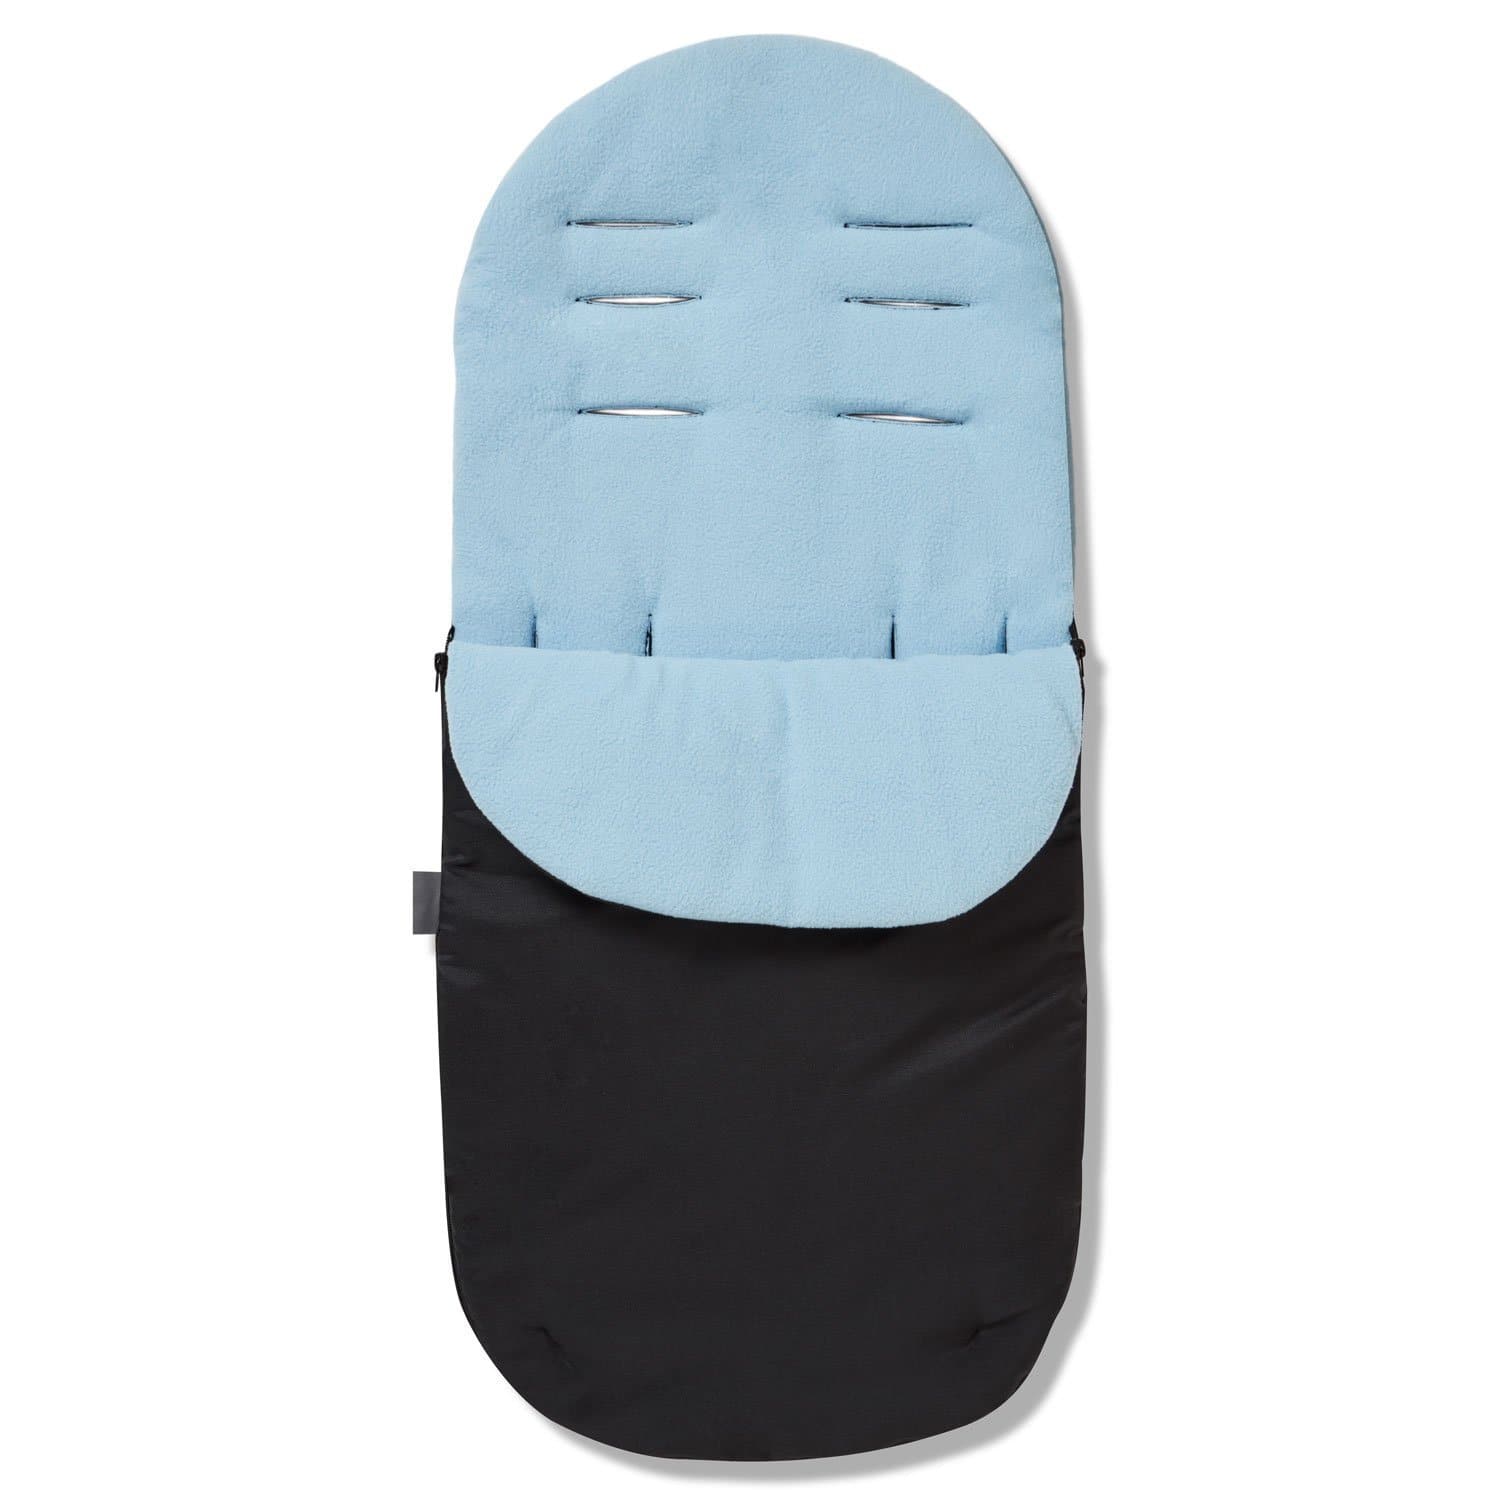 Footmuff / Cosy Toes Compatible with Baby Weavers - Light Blue / Fits All Models | For Your Little One